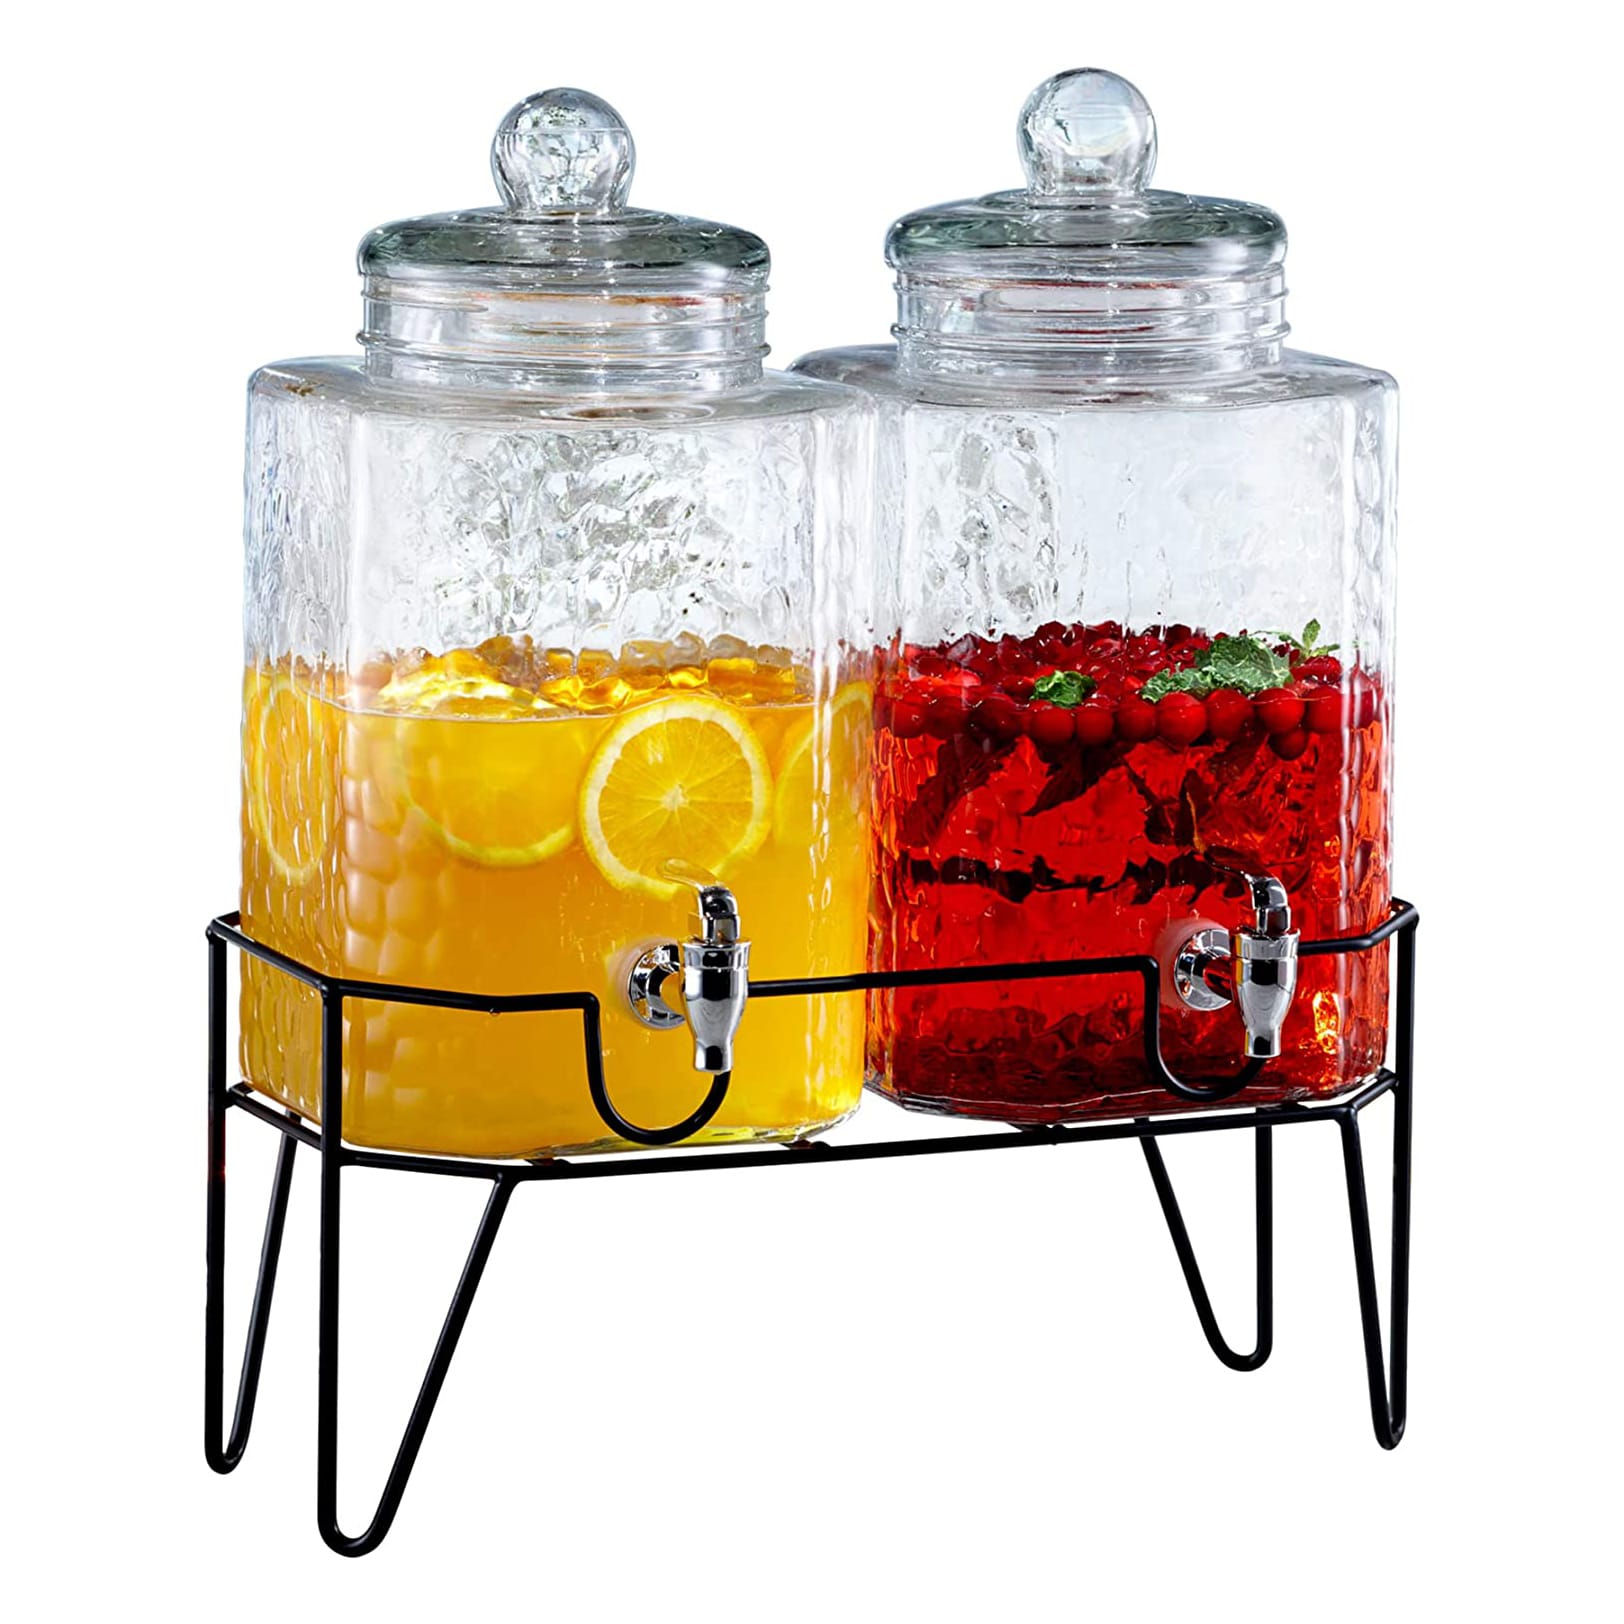 Best Glass Beverage Dispensers in 2022 Reviews | Guide